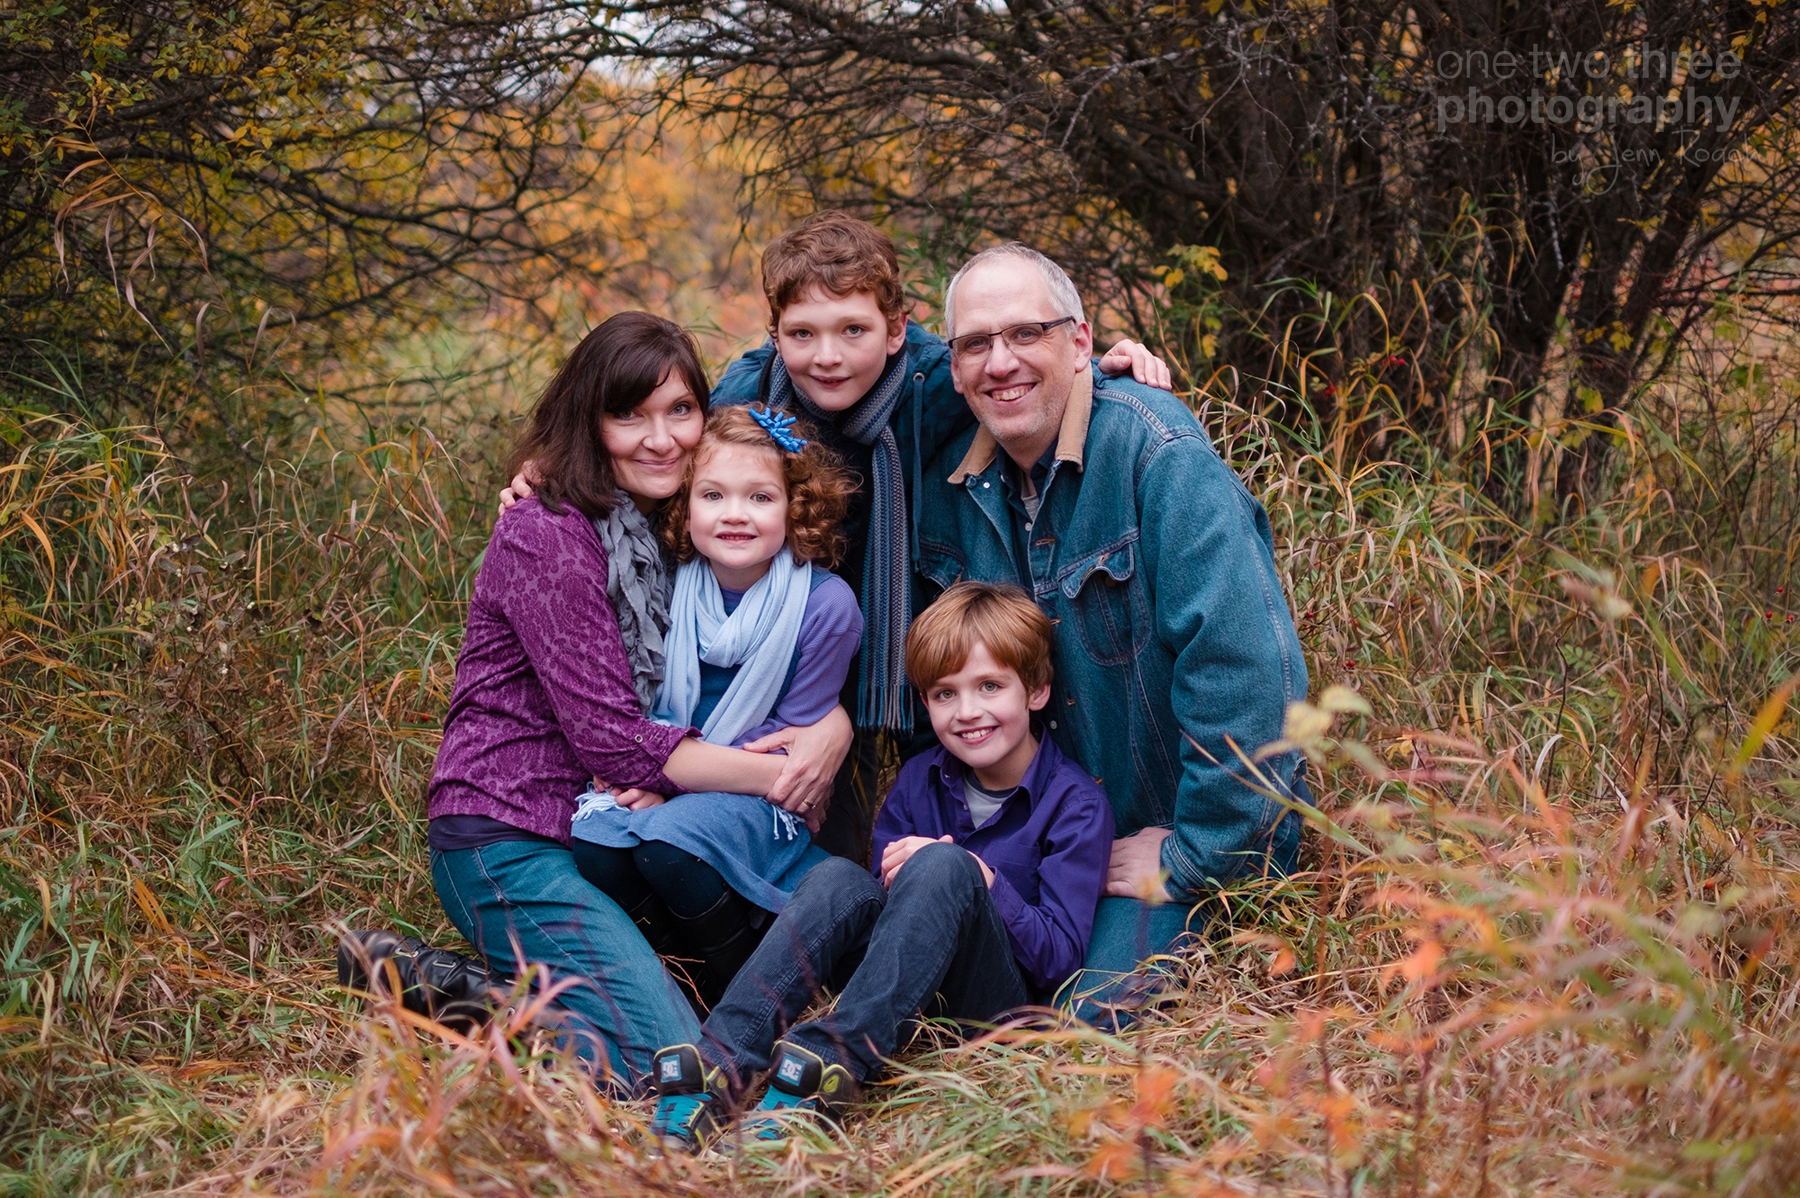 Cochrane Family Photo session in the fall